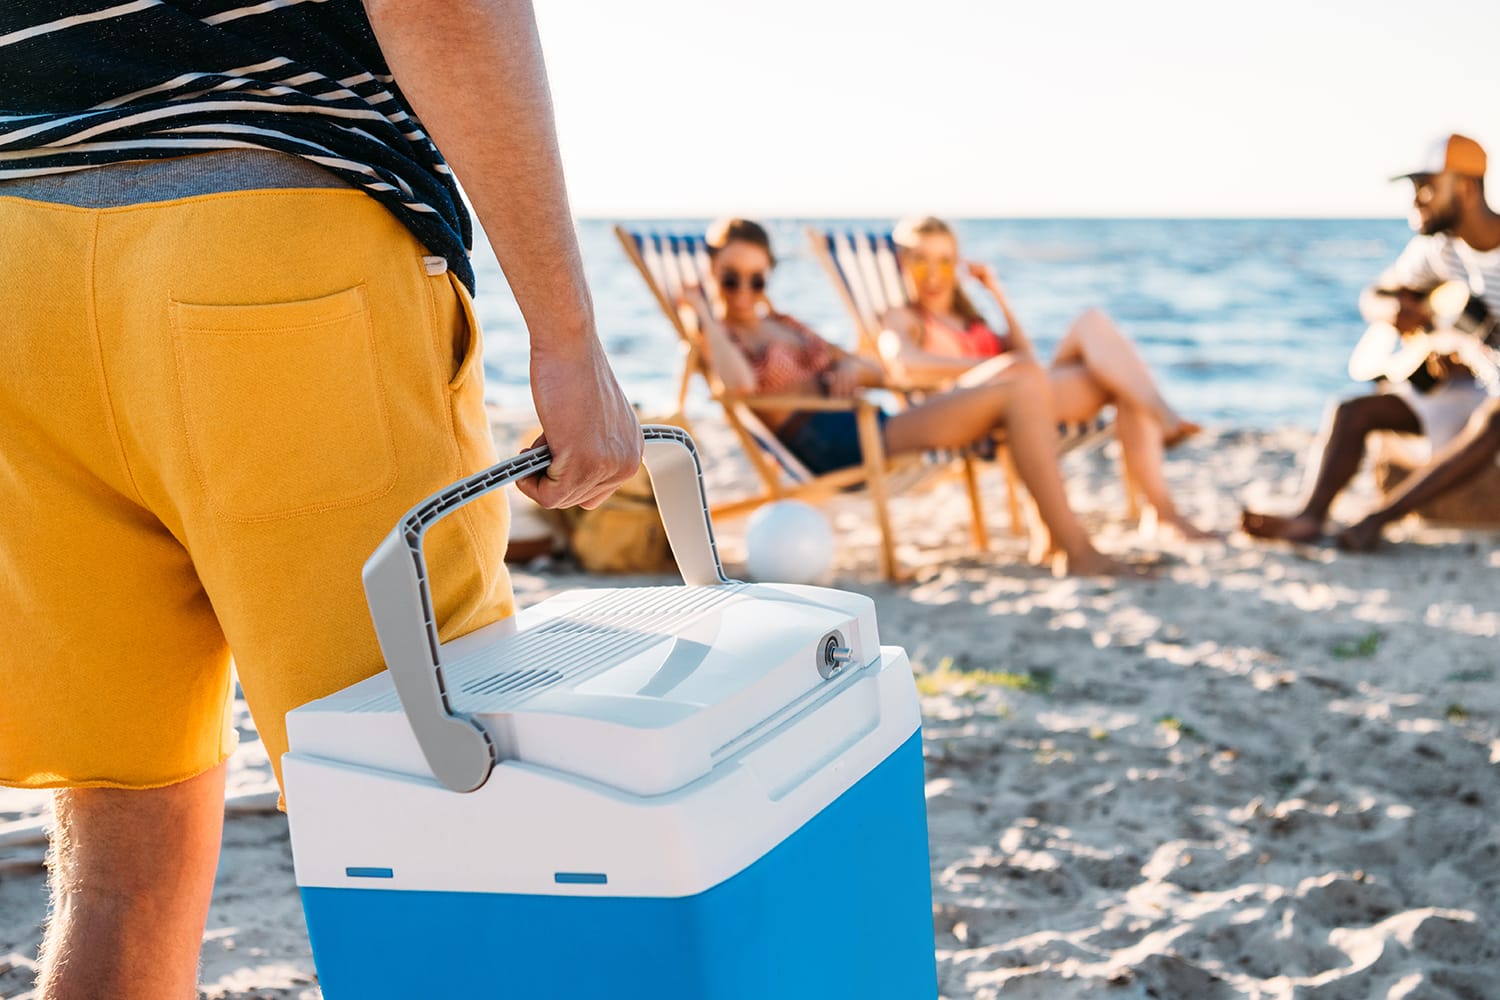 Large Electric BERG 45 Litre Cooler Cool /Warm Box Camping Beach Picnic RRP £189 